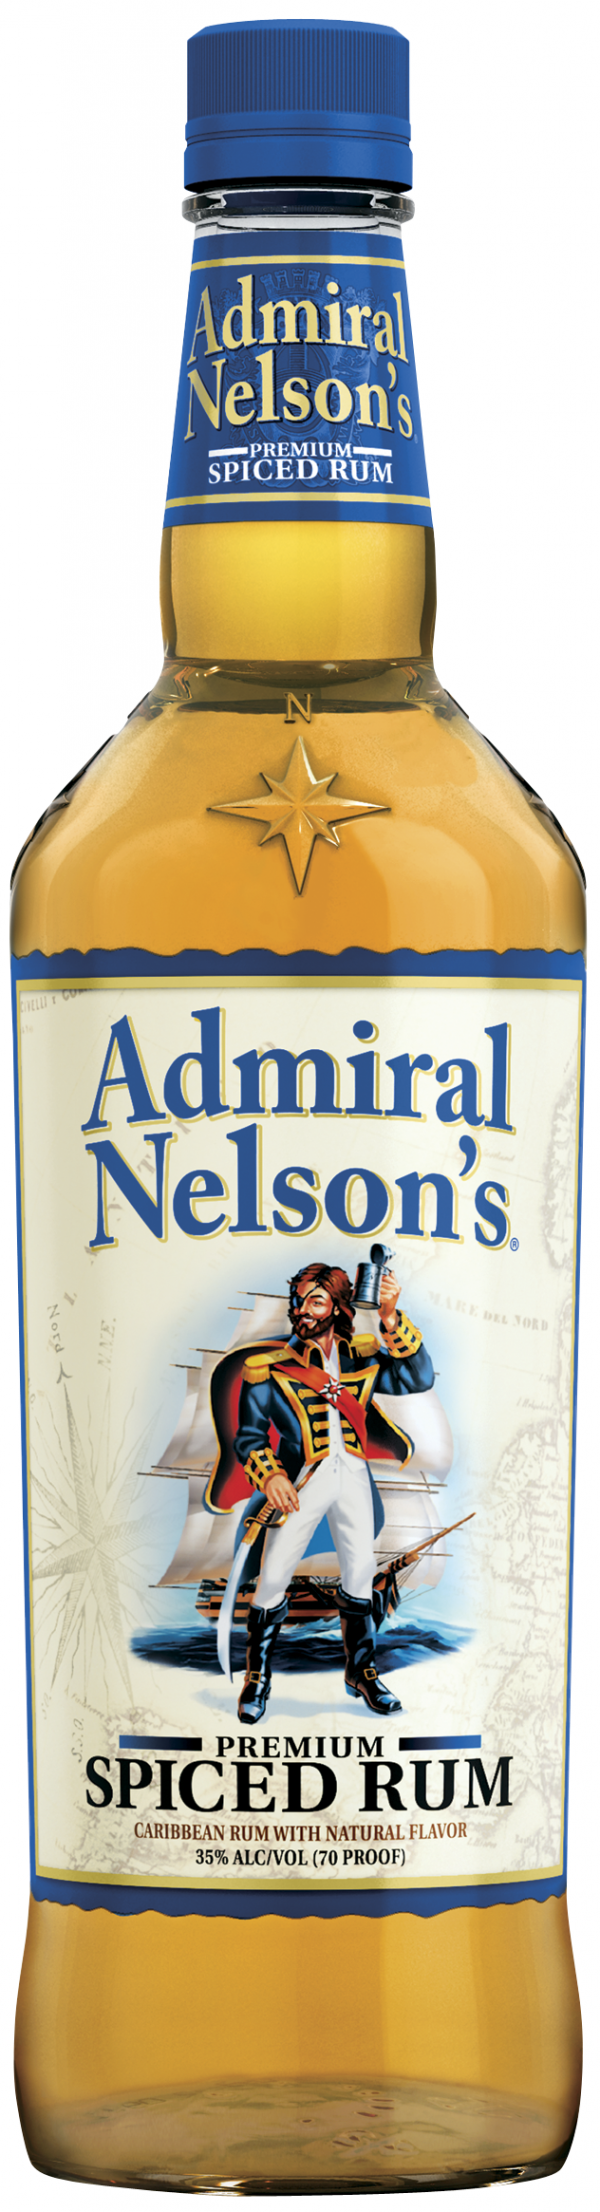 Zoom to enlarge the Admiral Nelson’s Premium Spiced Rum